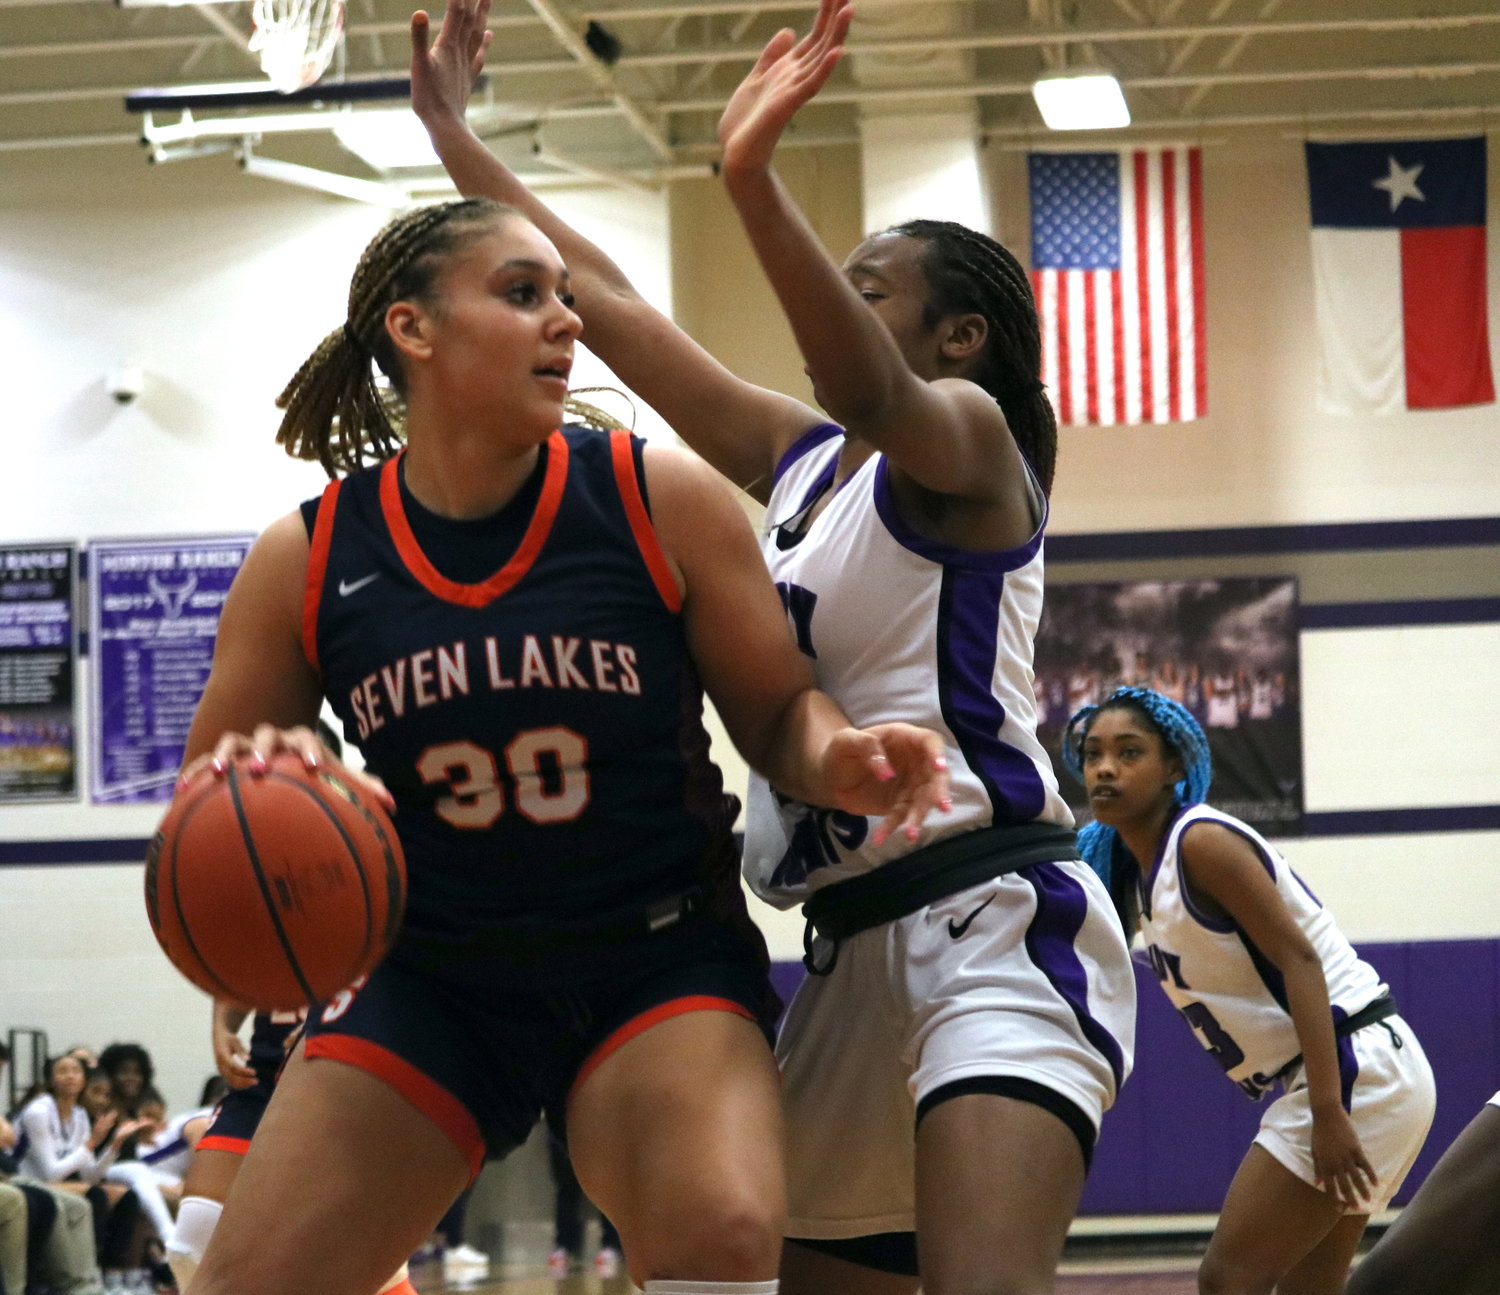 Justice Carlton backs down a defender during Friday's game between Seven Lakes and Morton Ranch at the Morton Ranch gym.